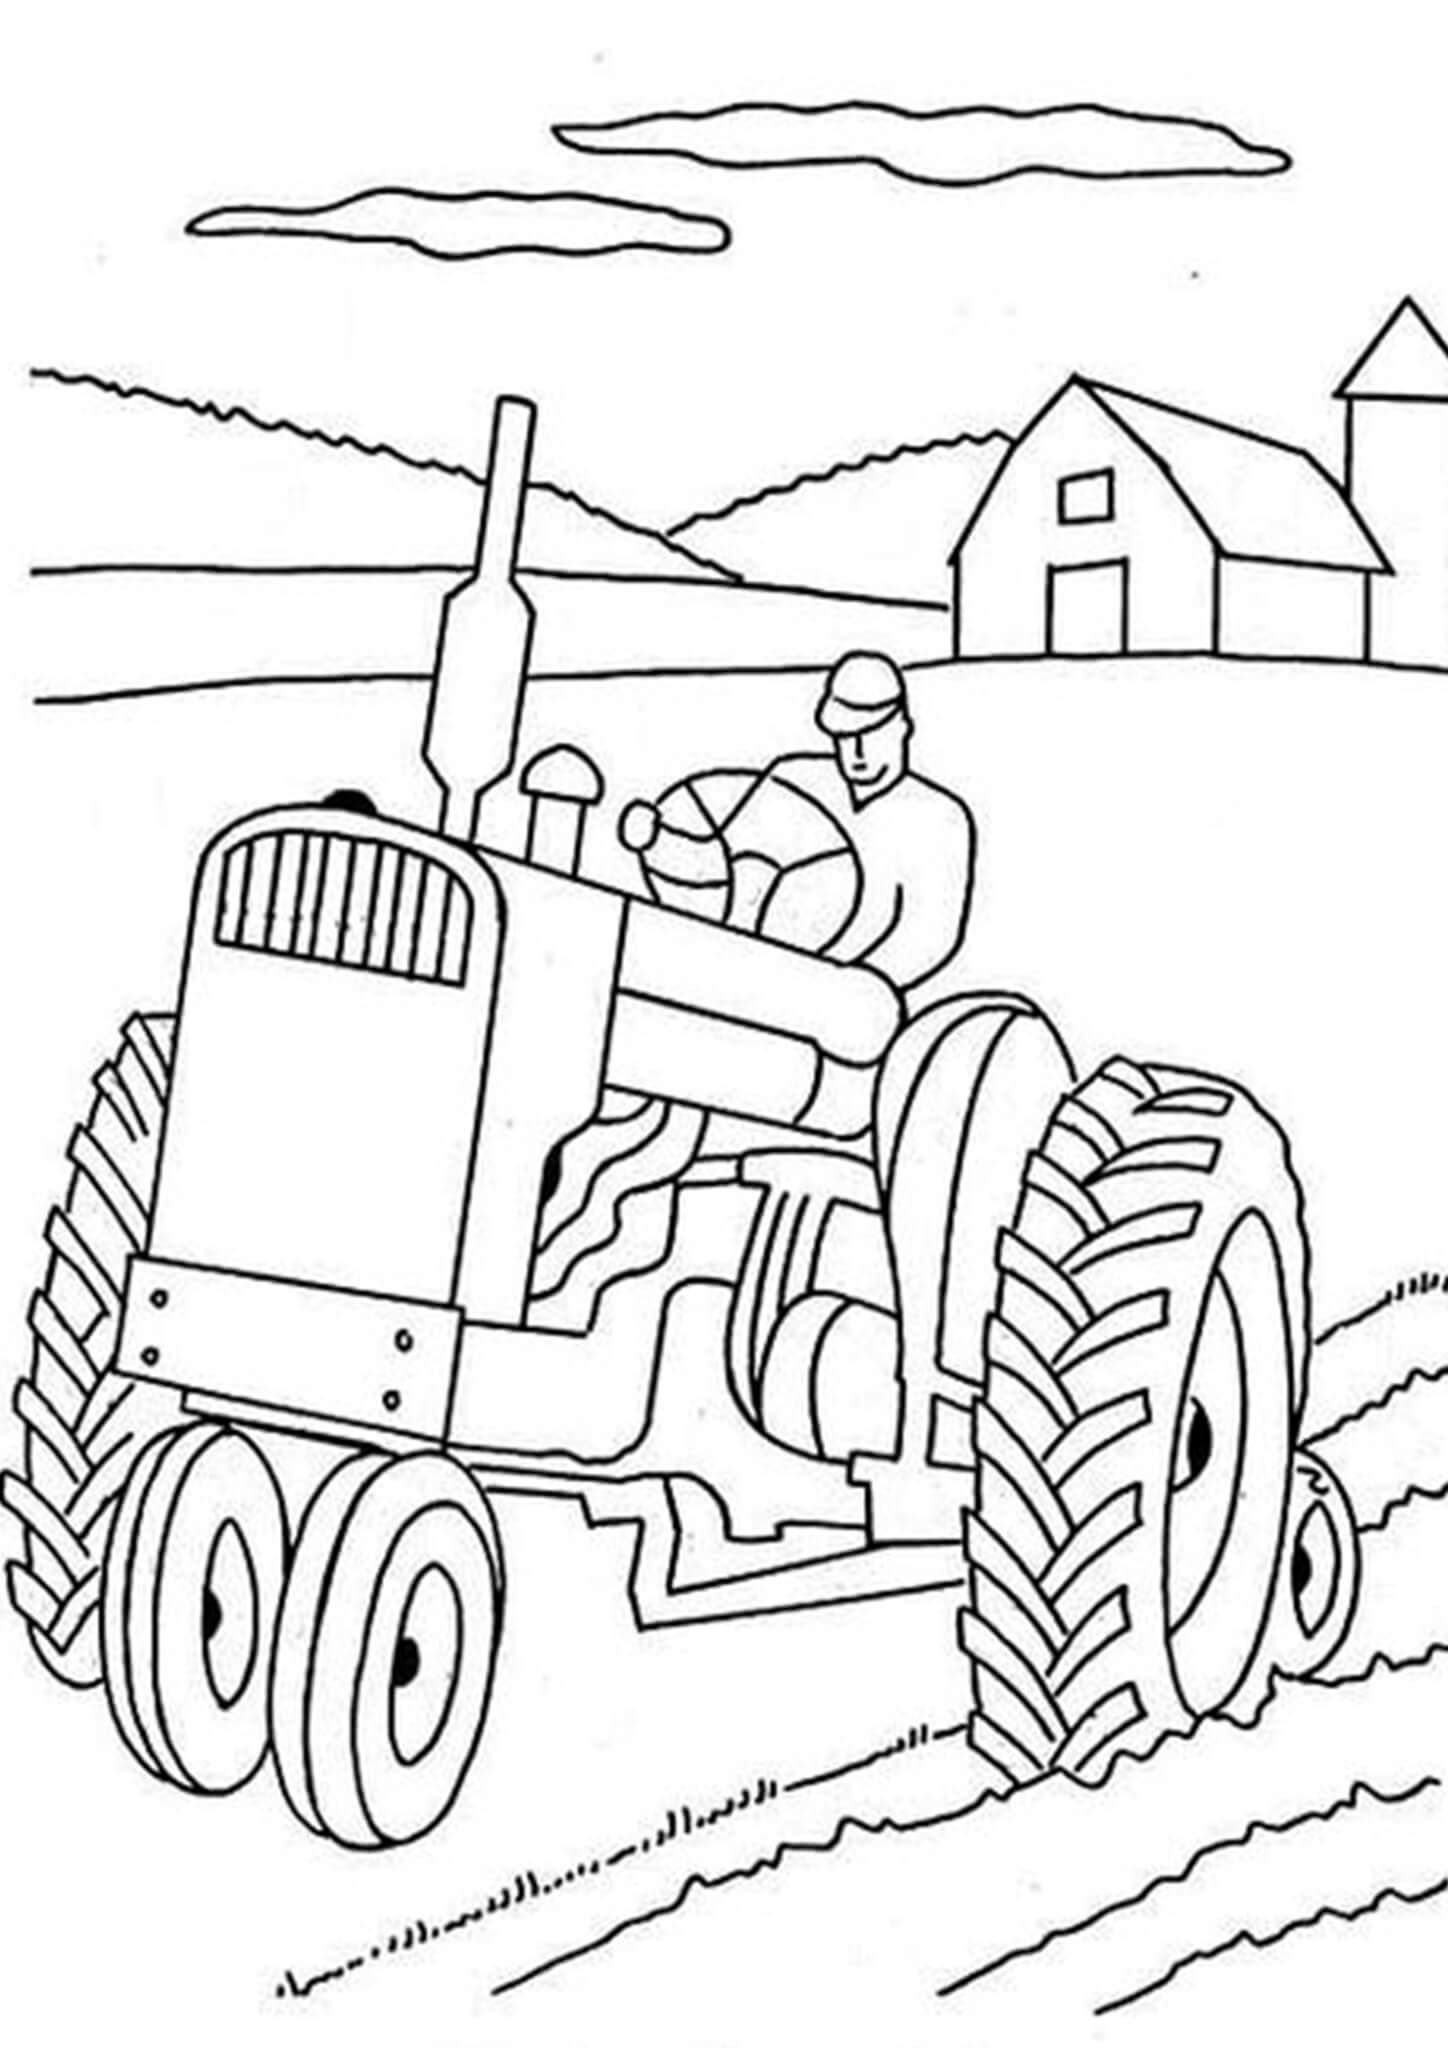 Free easy to print tractor coloring pages farm coloring pages tractor coloring pages kids printable coloring pages